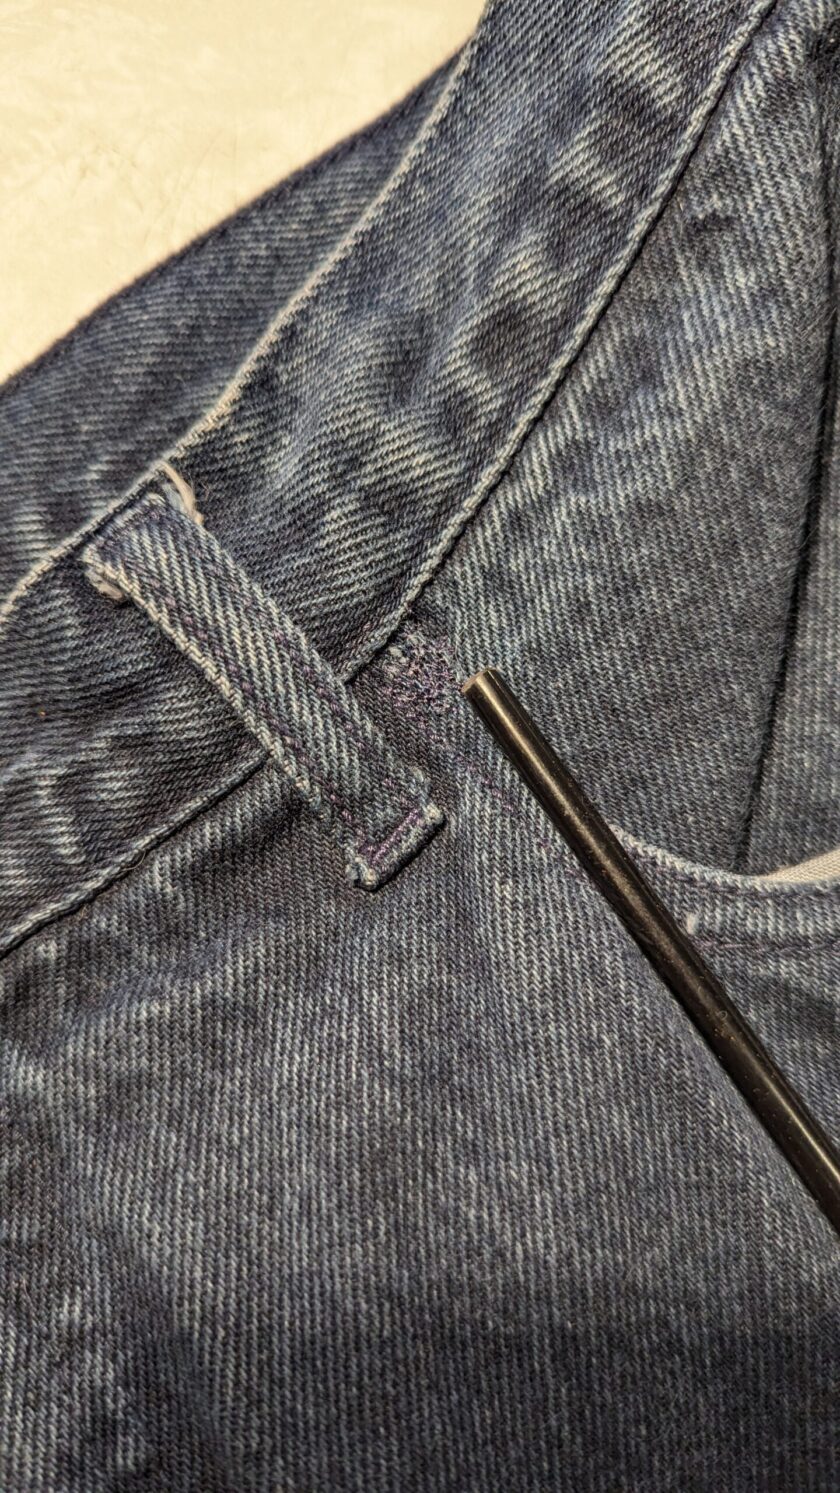 A close up of the pocket of a pair of jeans.